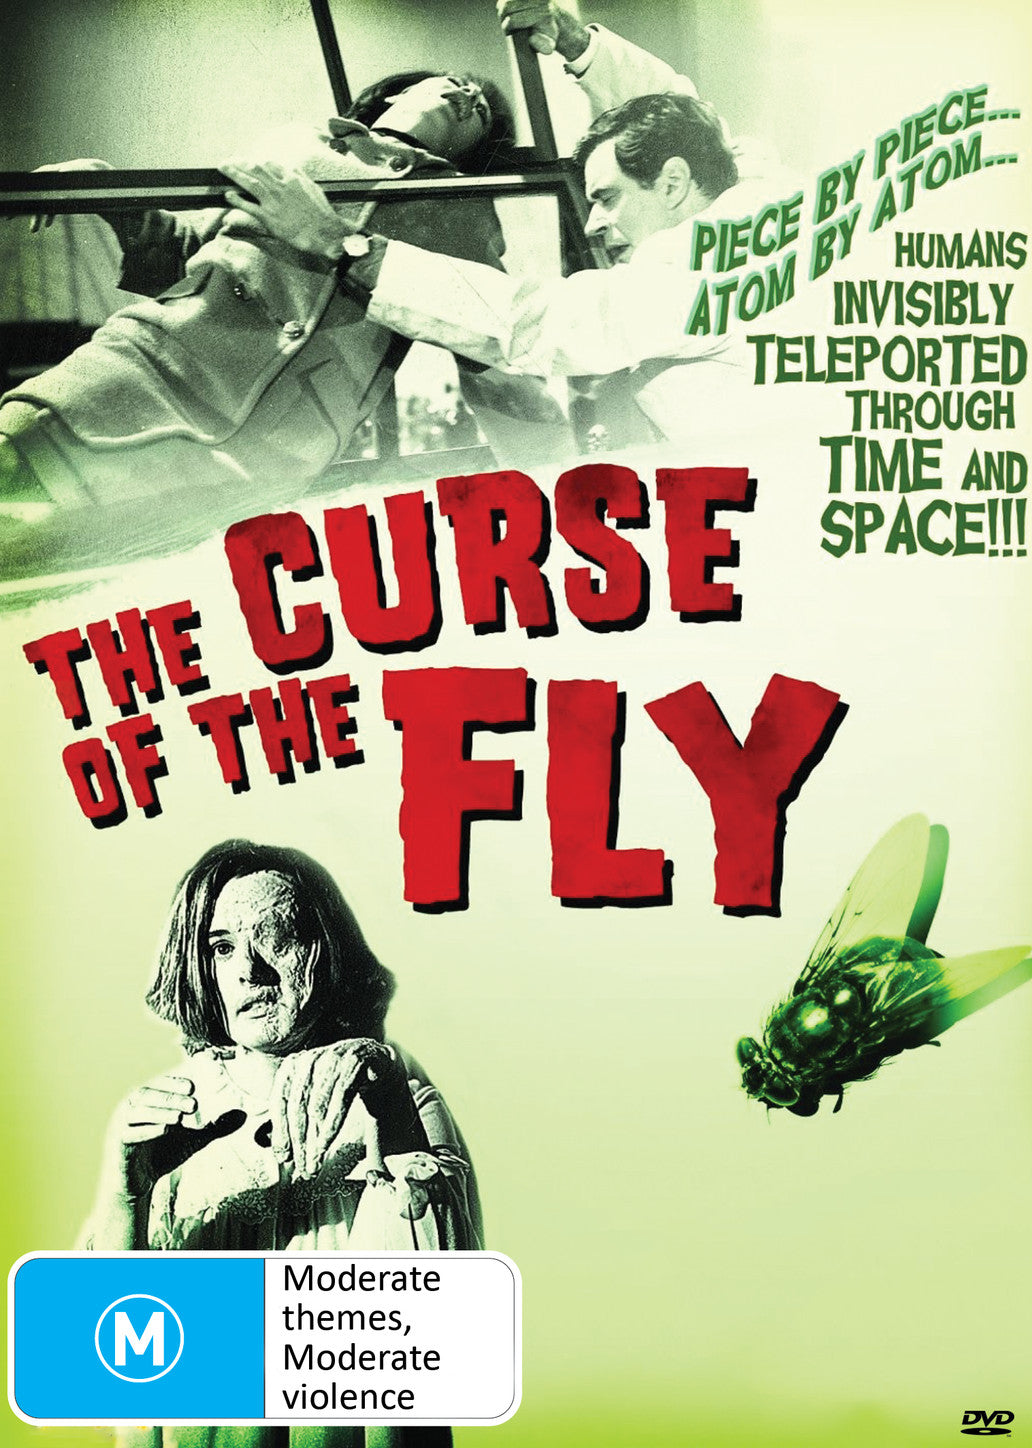 CURSE OF THE FLY